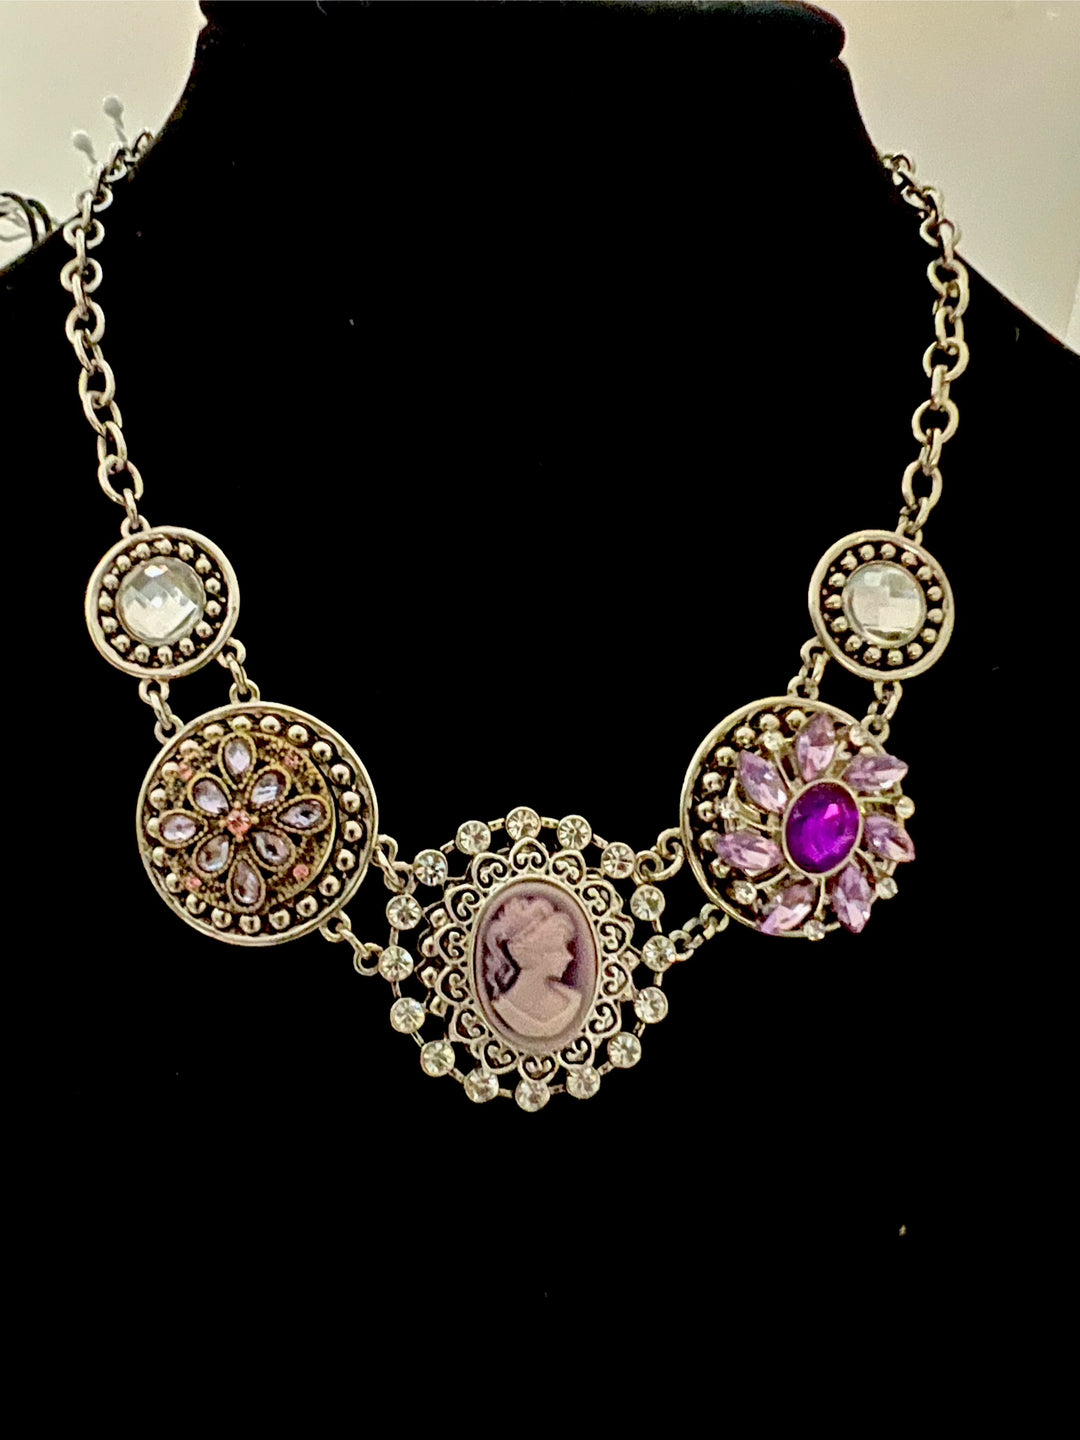 18" Triple Snap Jewelry Necklace with Clear Rhinestones Fits Three 18/20MM Snaps